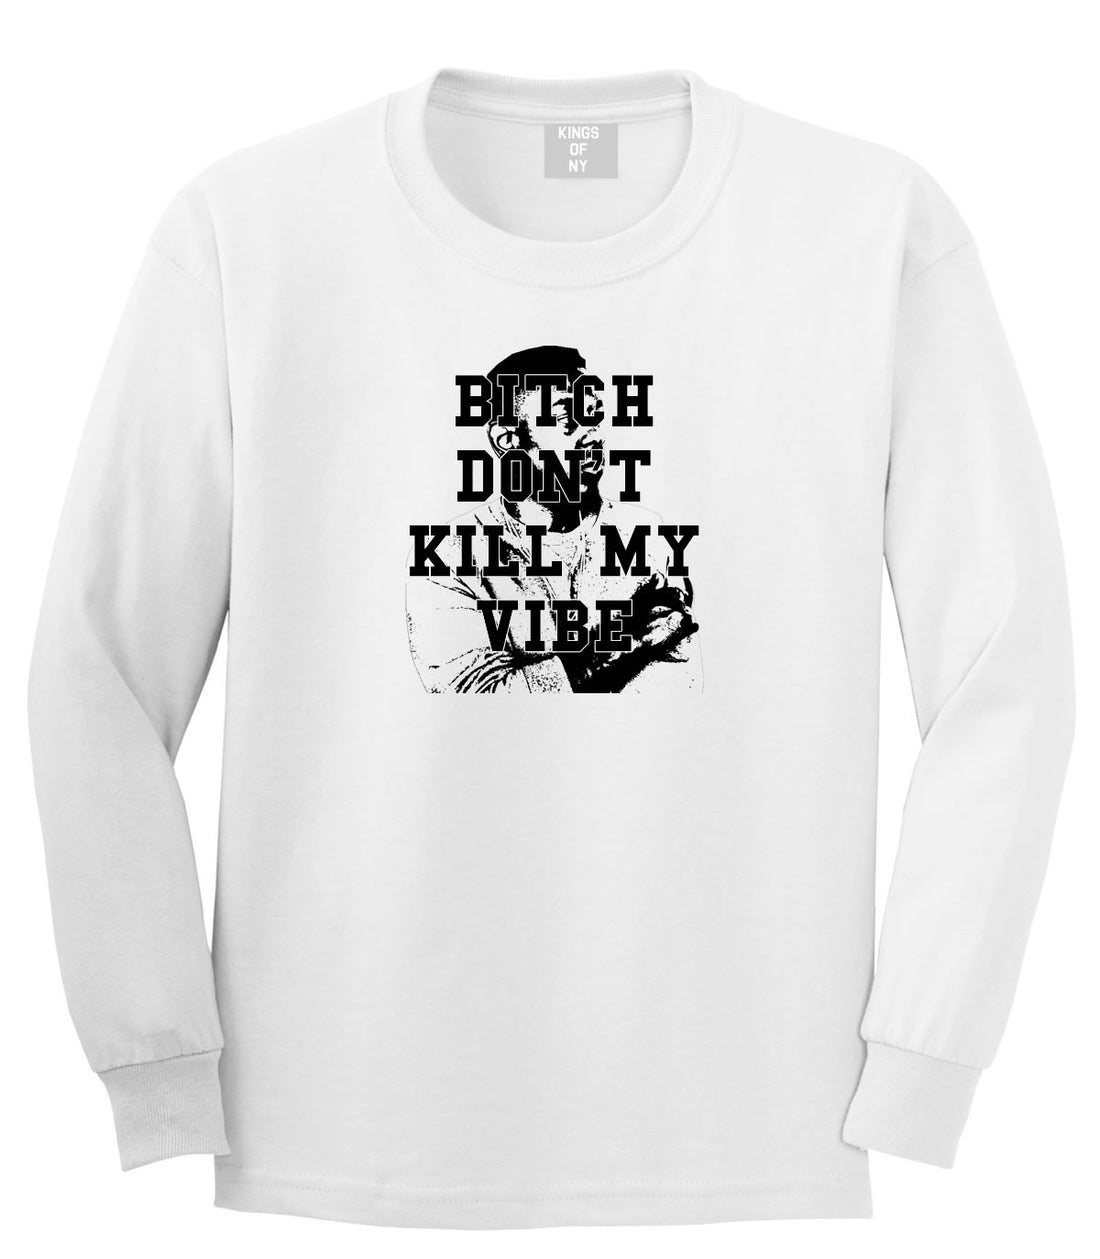 Bitch Dont Kill My Vibe Kendrick Long Sleeve Boys Kids T-Shirt in White by Kings Of NY